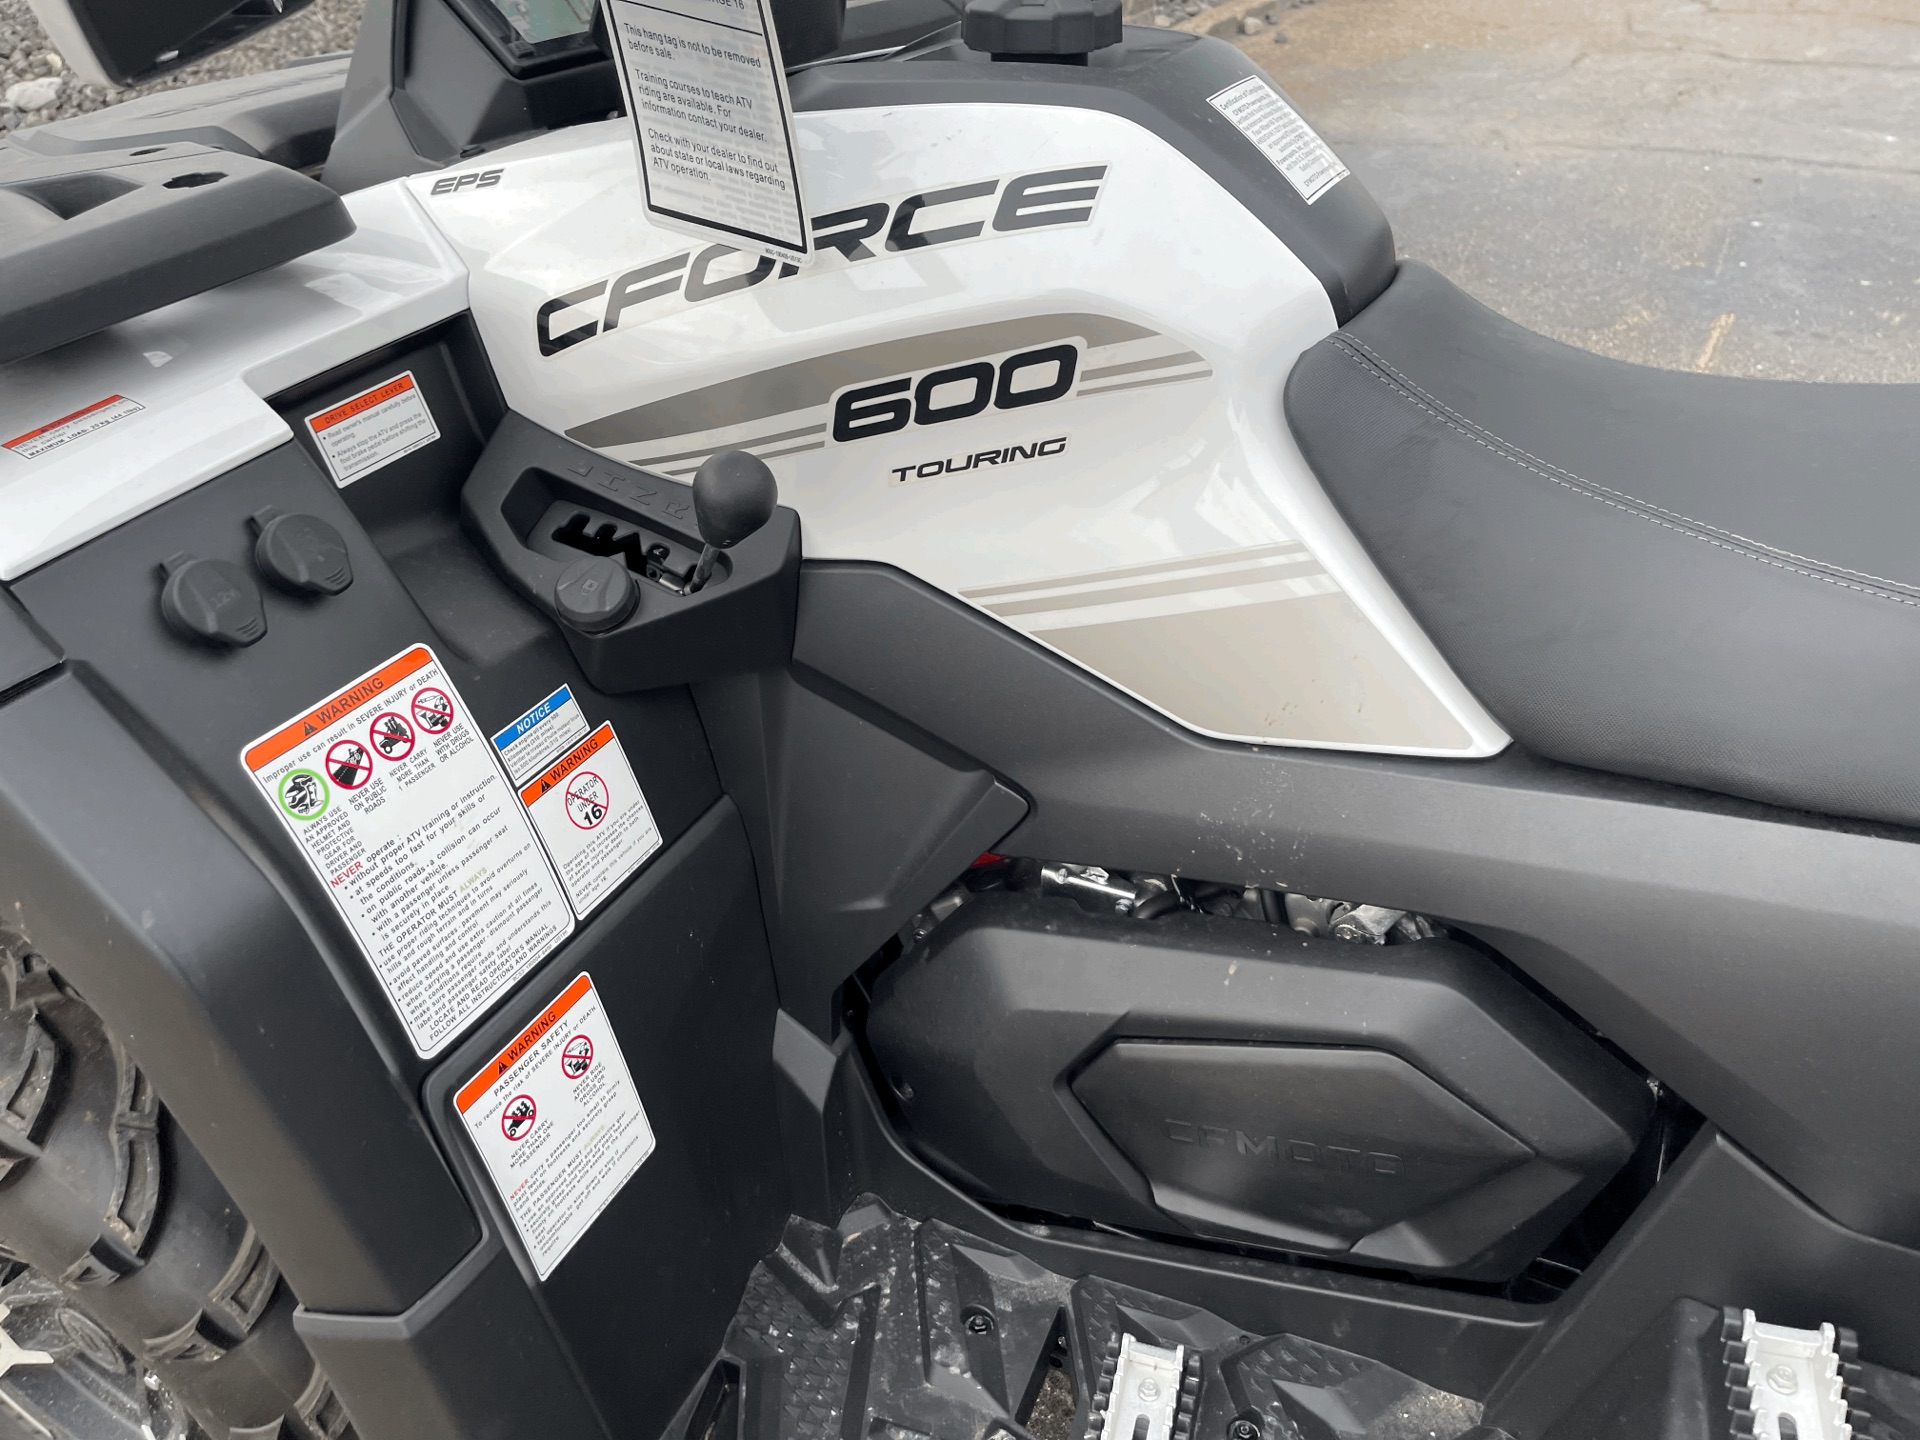 2022 CFMOTO CForce 600 Touring in Dyersburg, Tennessee - Photo 11